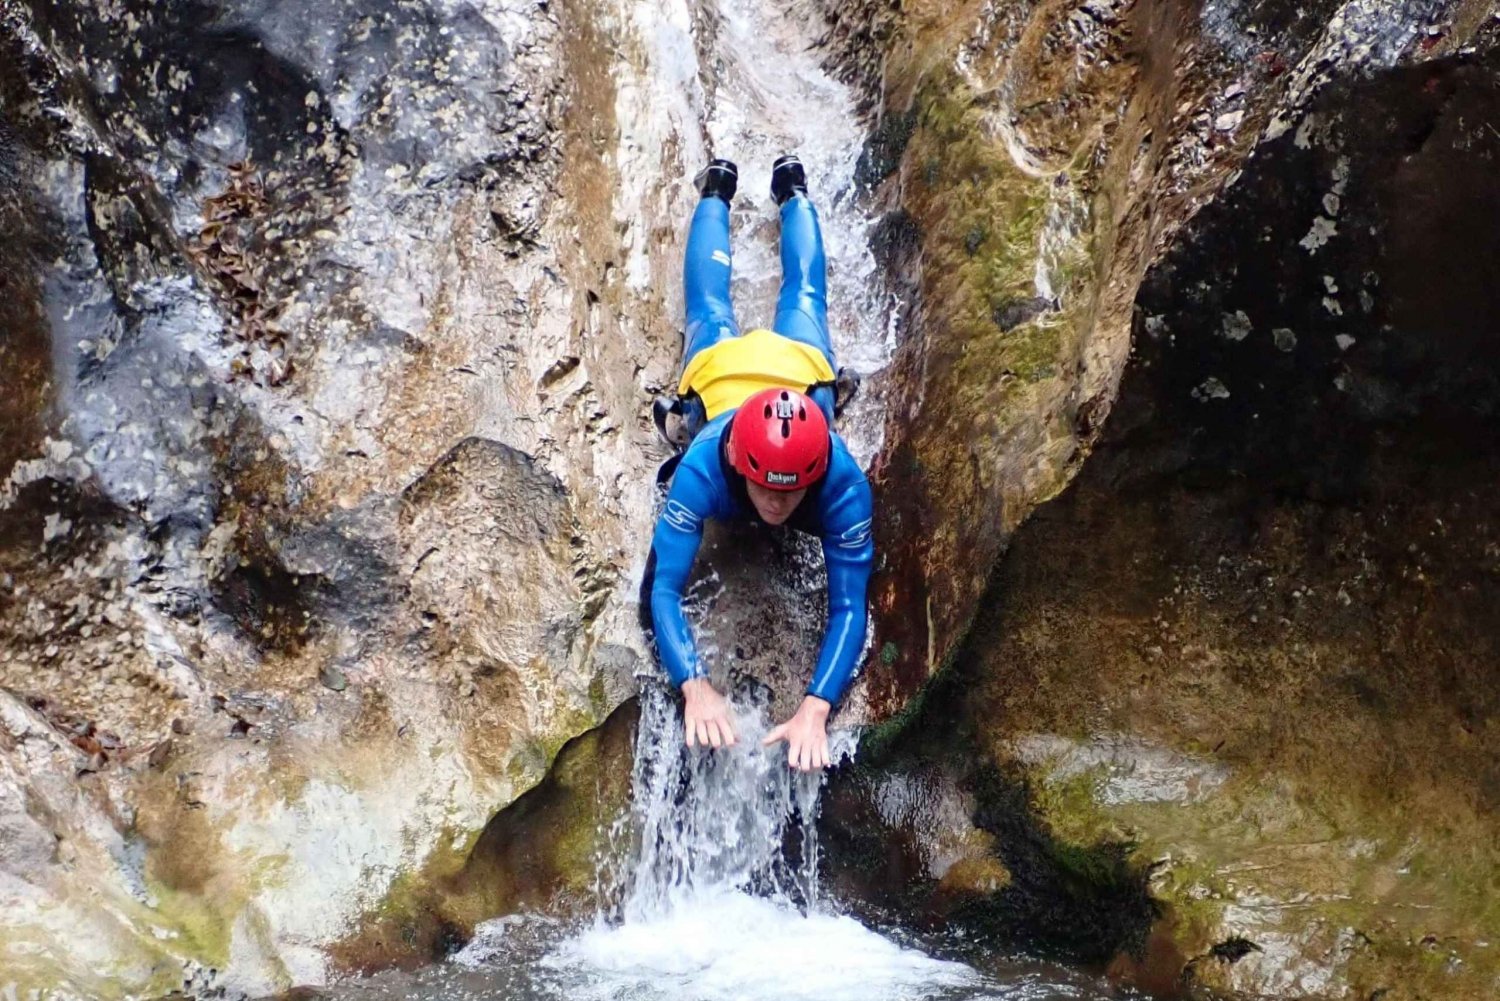 From Bovec: Sušec Stream Canyoning in the Soča Valley